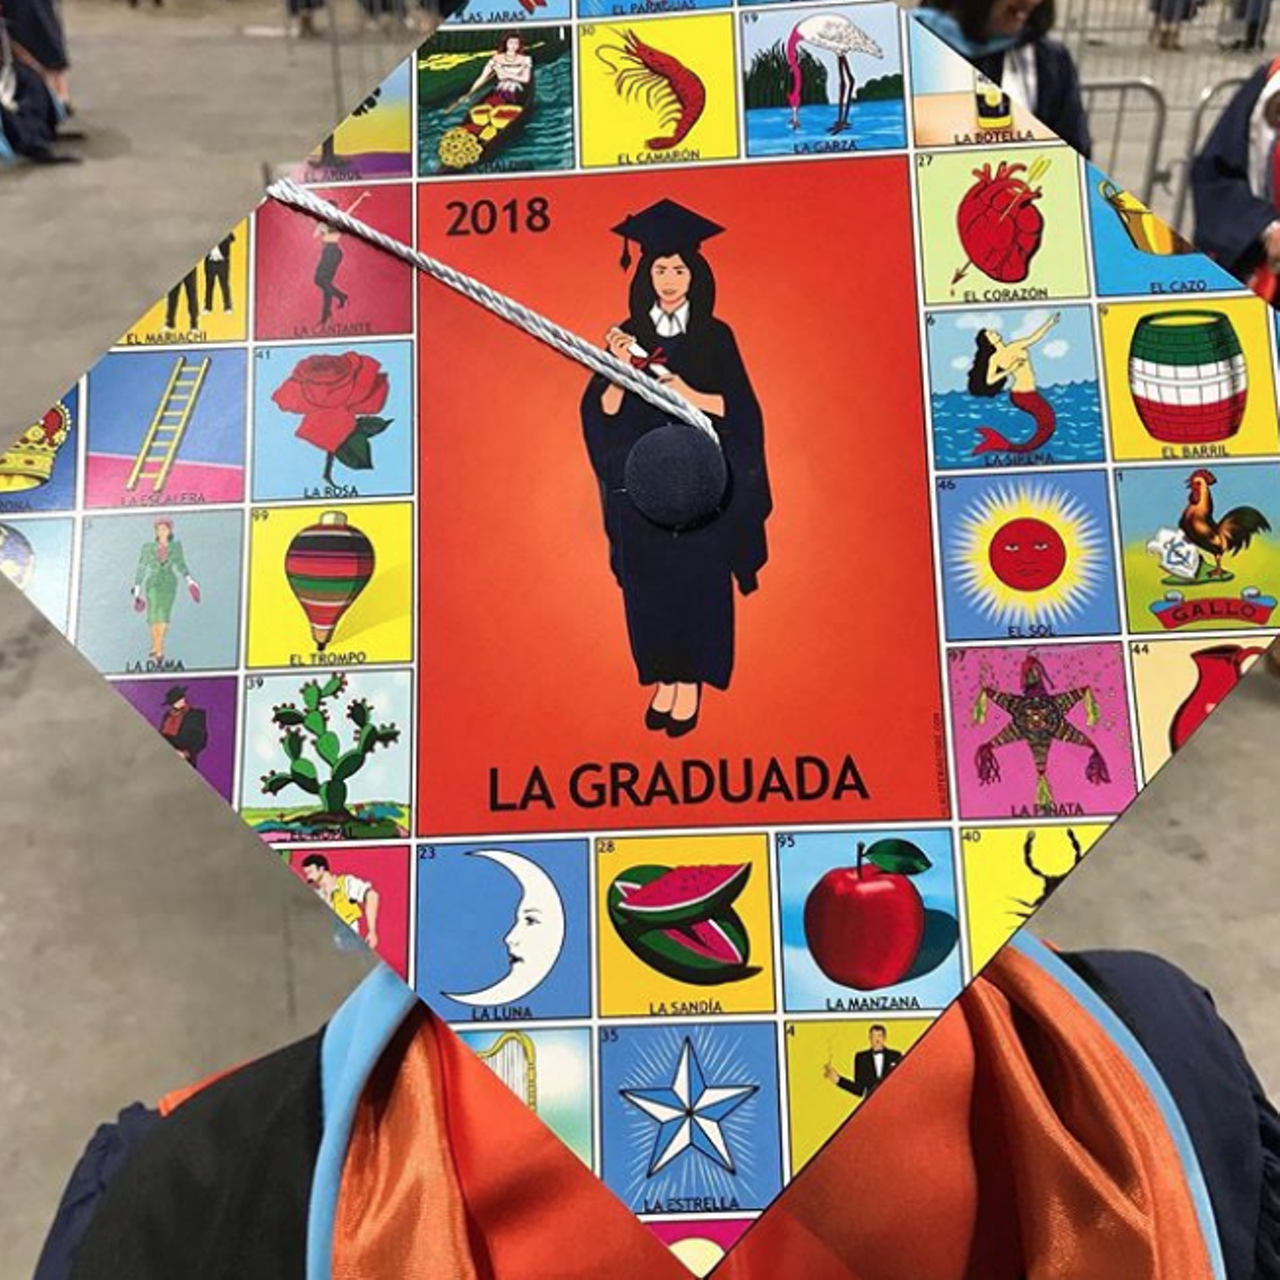 First-generation students have a lot of pride — as they should
There’s a lot of well-deserved pride for first-generation college attendees and especially first-gen college graduates. UTSA takes a lot of pride in being a university rooted heavily in the community of San Antonio.
Photo via Instagram / rhondagphd